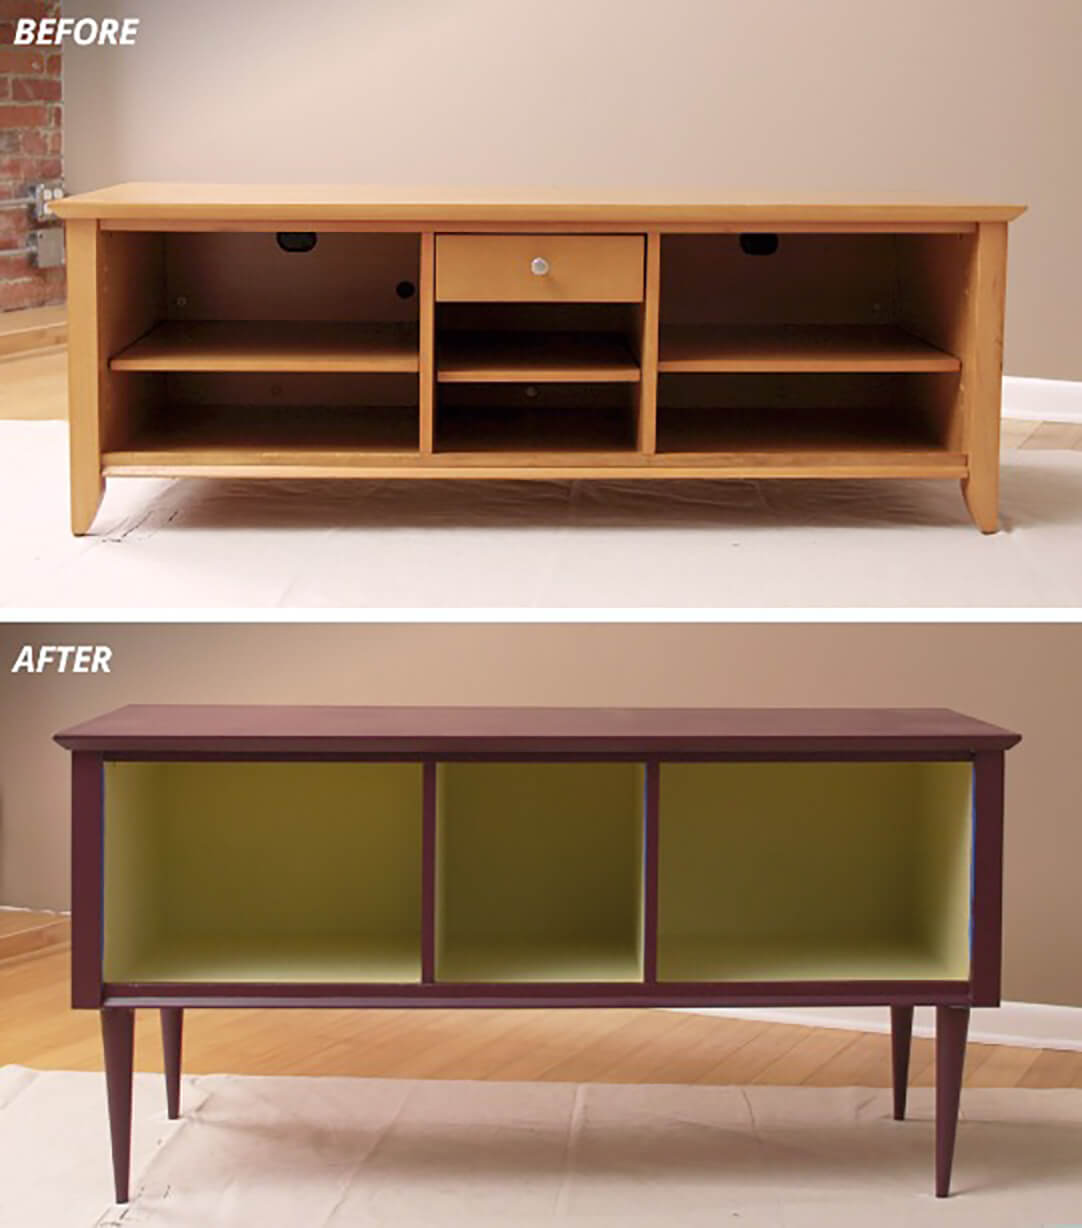 A before and after of a console table being painted.